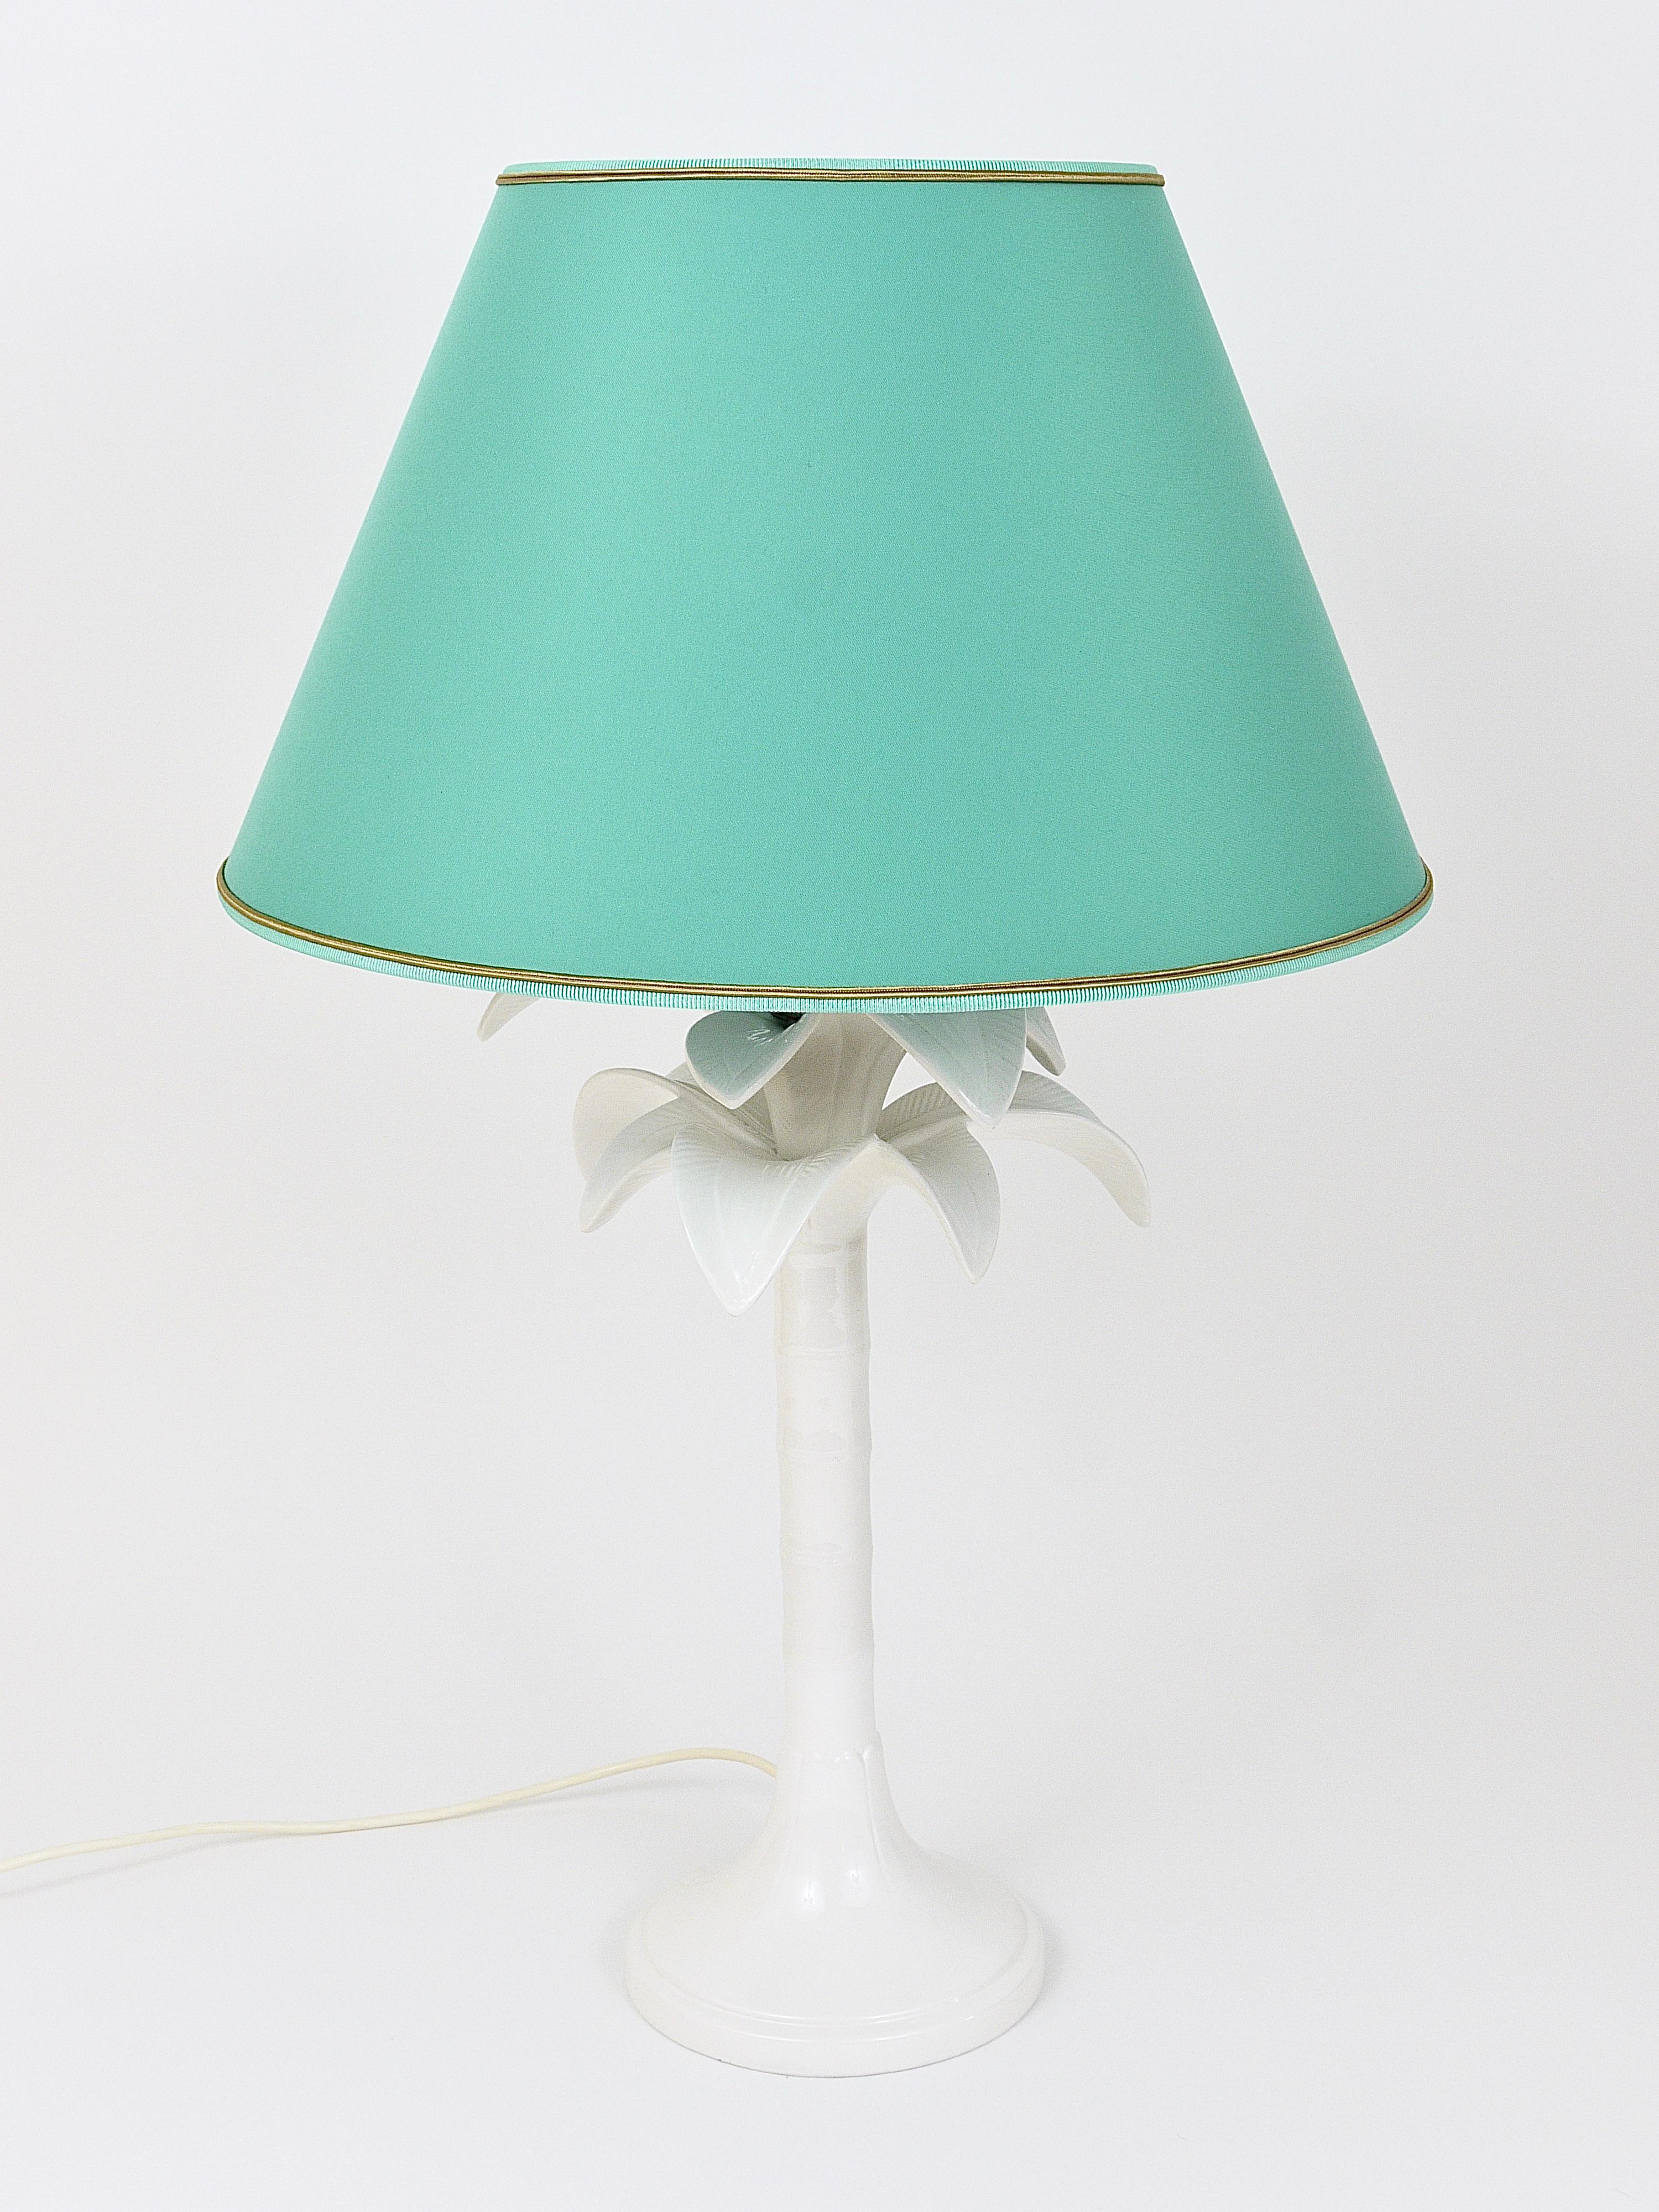 Tommaso Barbi White Palm Tree Faux Bamboo Table Lamp, Italy, 1970s For Sale 8